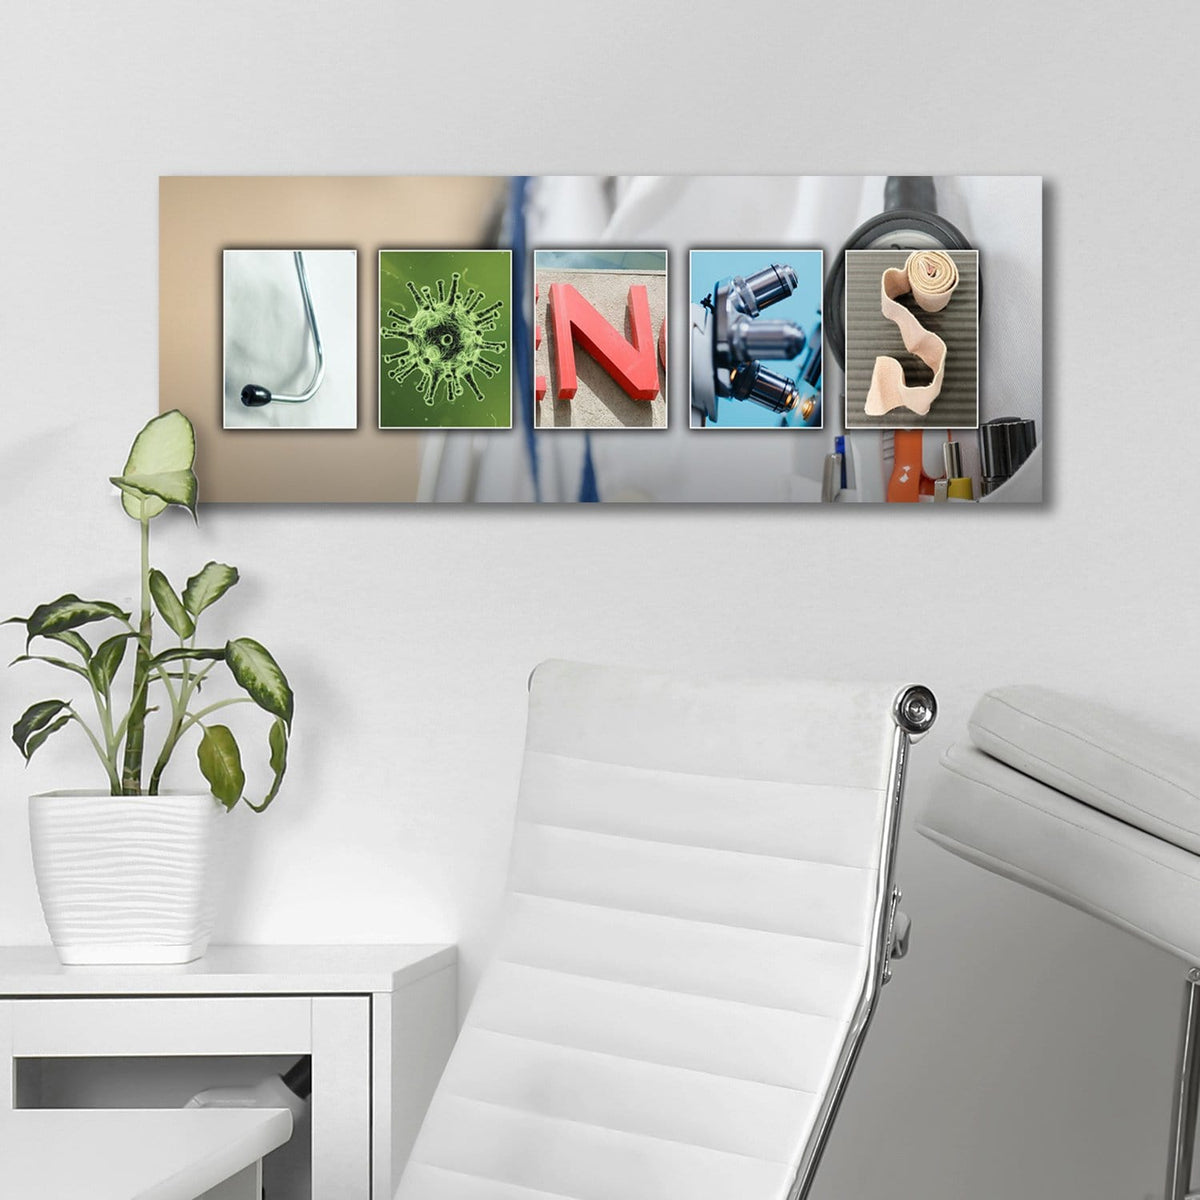 Makes a great personalized gift for a Nurse or Doctor&#39;s Office